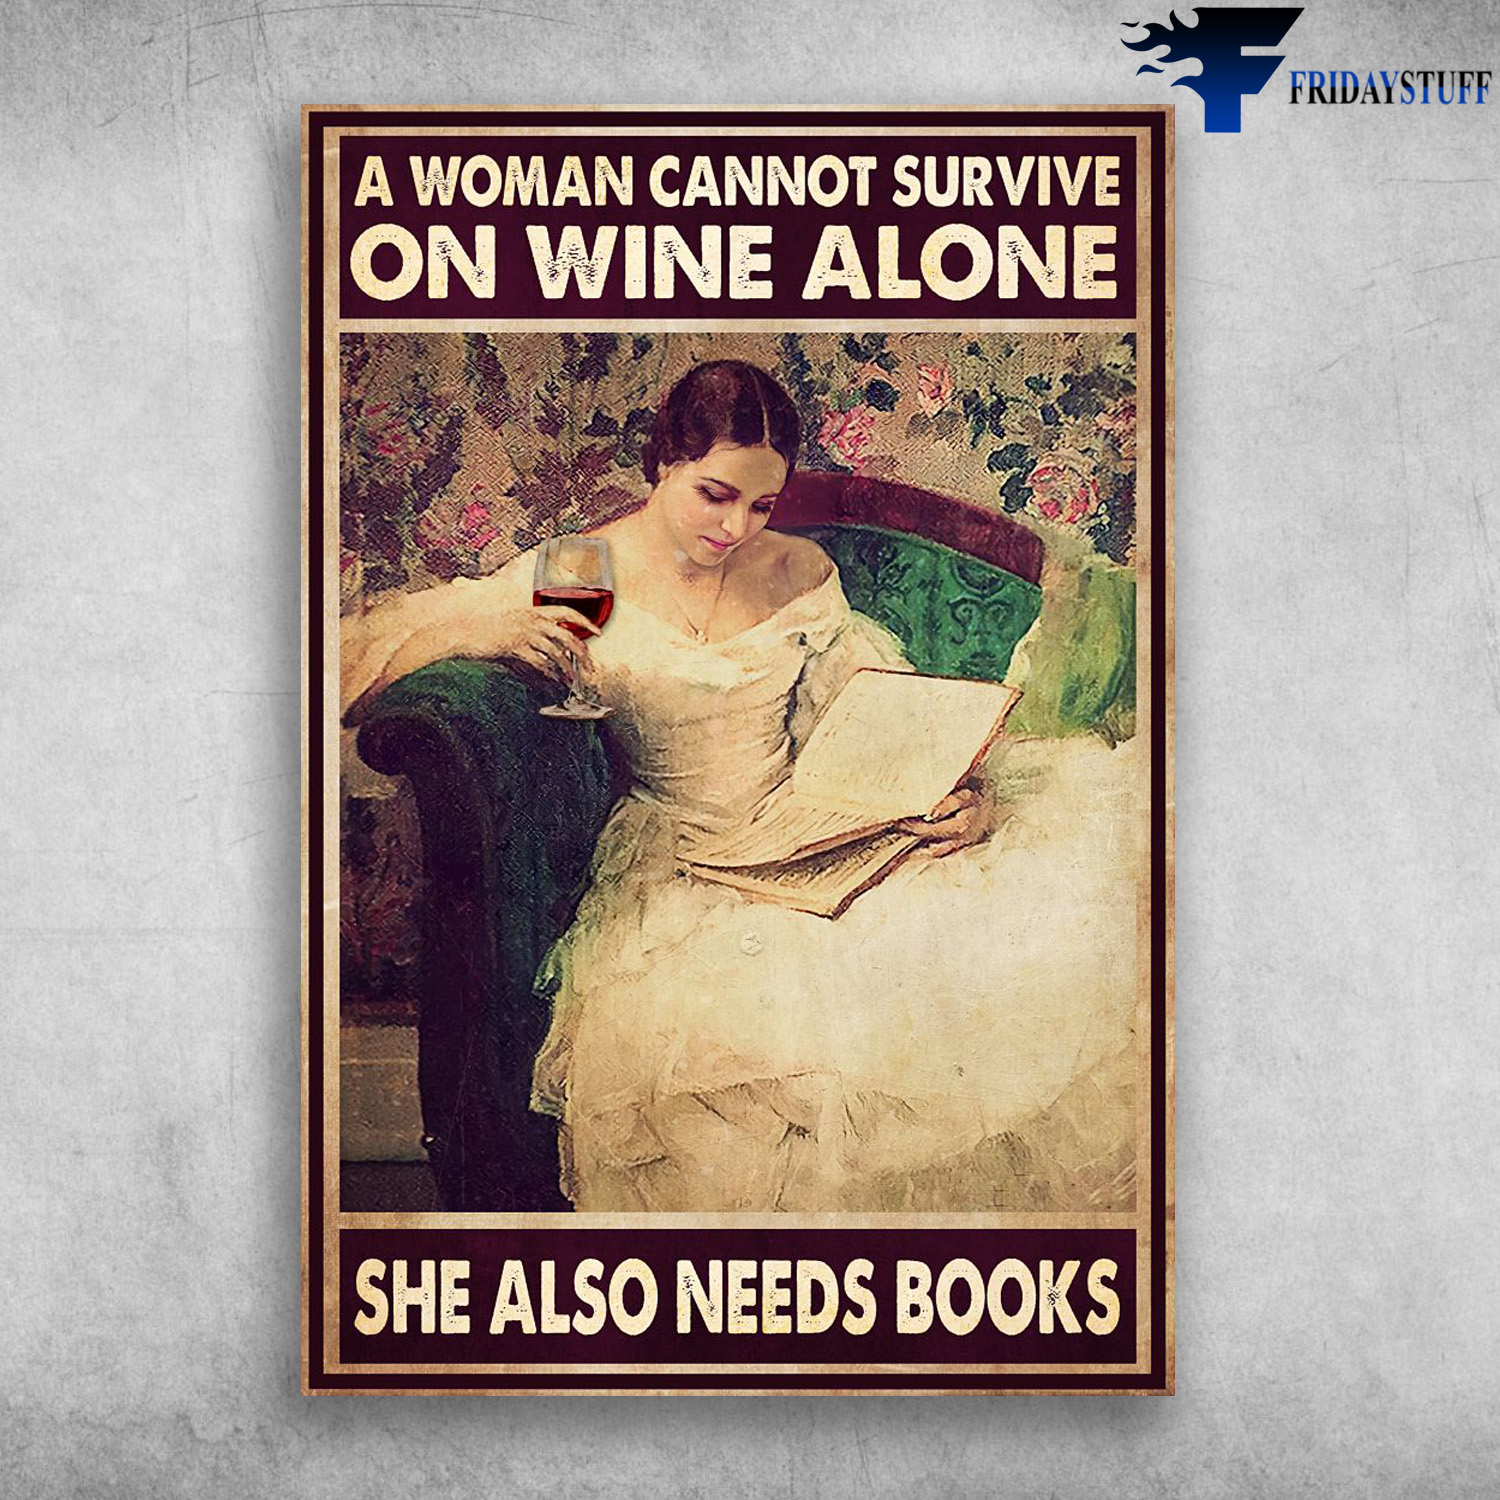 The Girl Loves Book And Wine - A Woman Cannot Survive, On Wine A Lone, She Also Needs Books